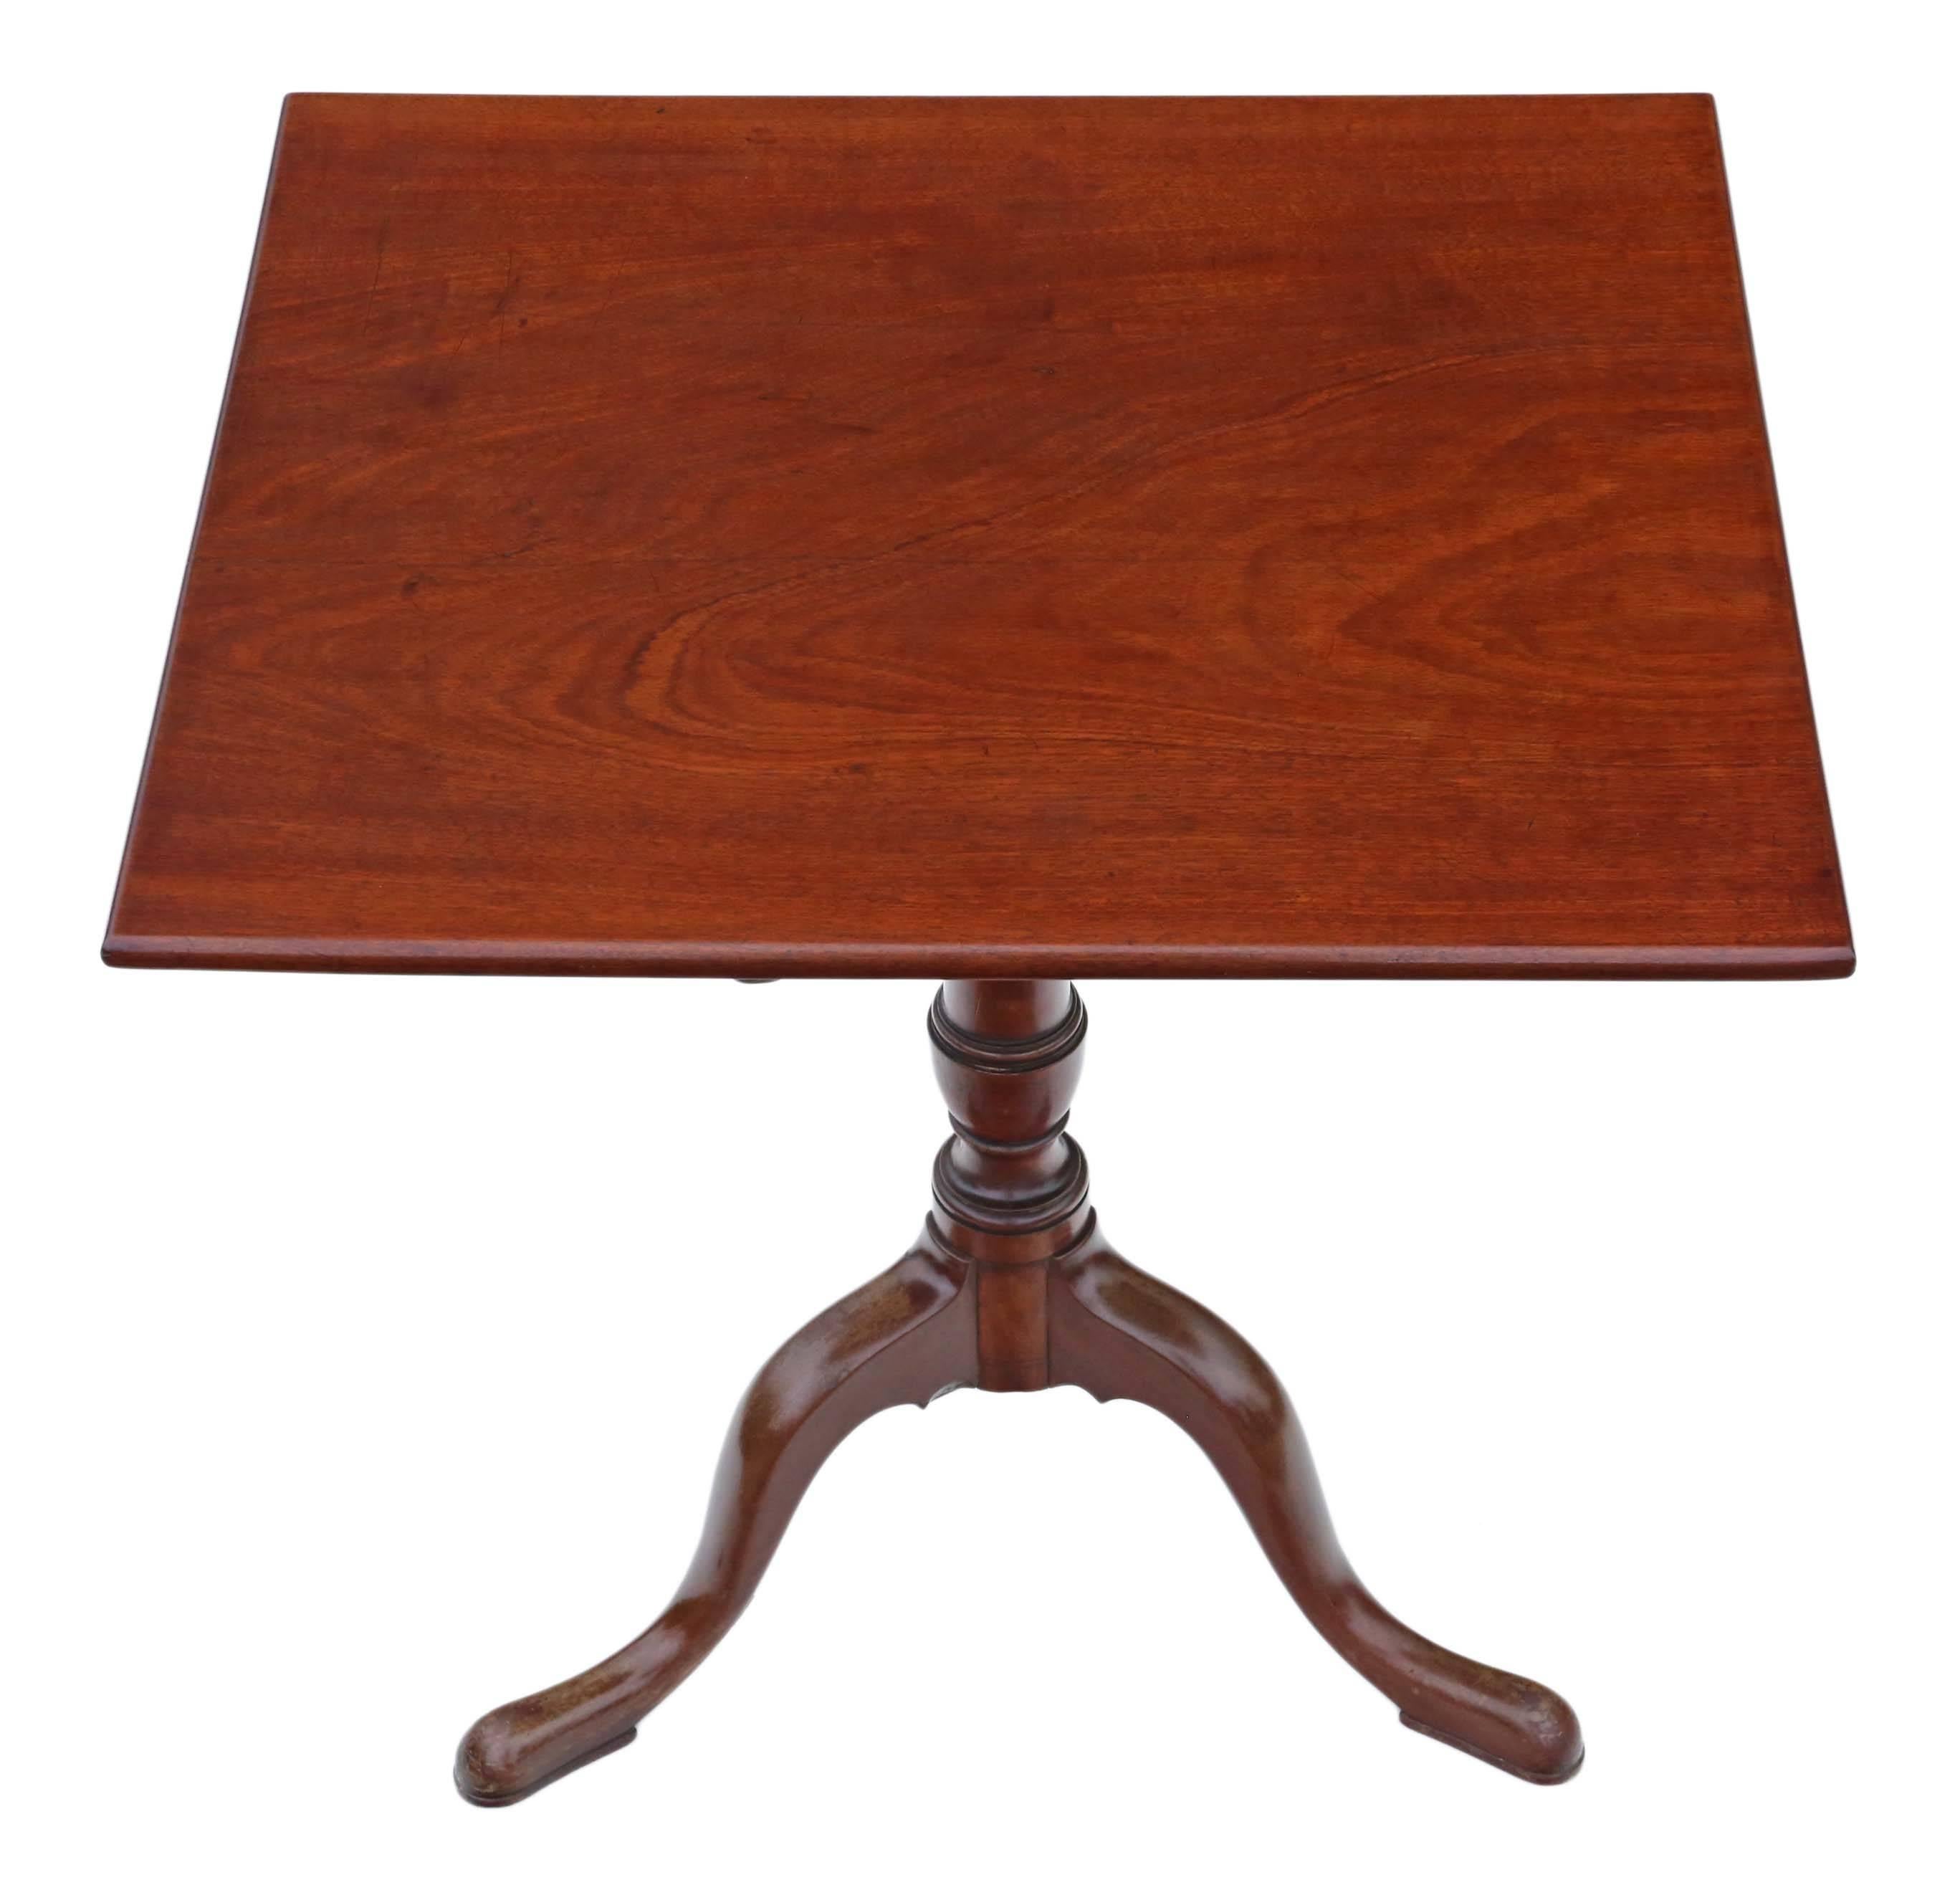 Antique Georgian circa 1820 mahogany tilt-top supper side or wine table.

Solid with no loose joints and the catch works. A charming table.

No woodworm.

Would look great in the right location!

Overall maximum dimensions: 71cm W x 64.5cm D